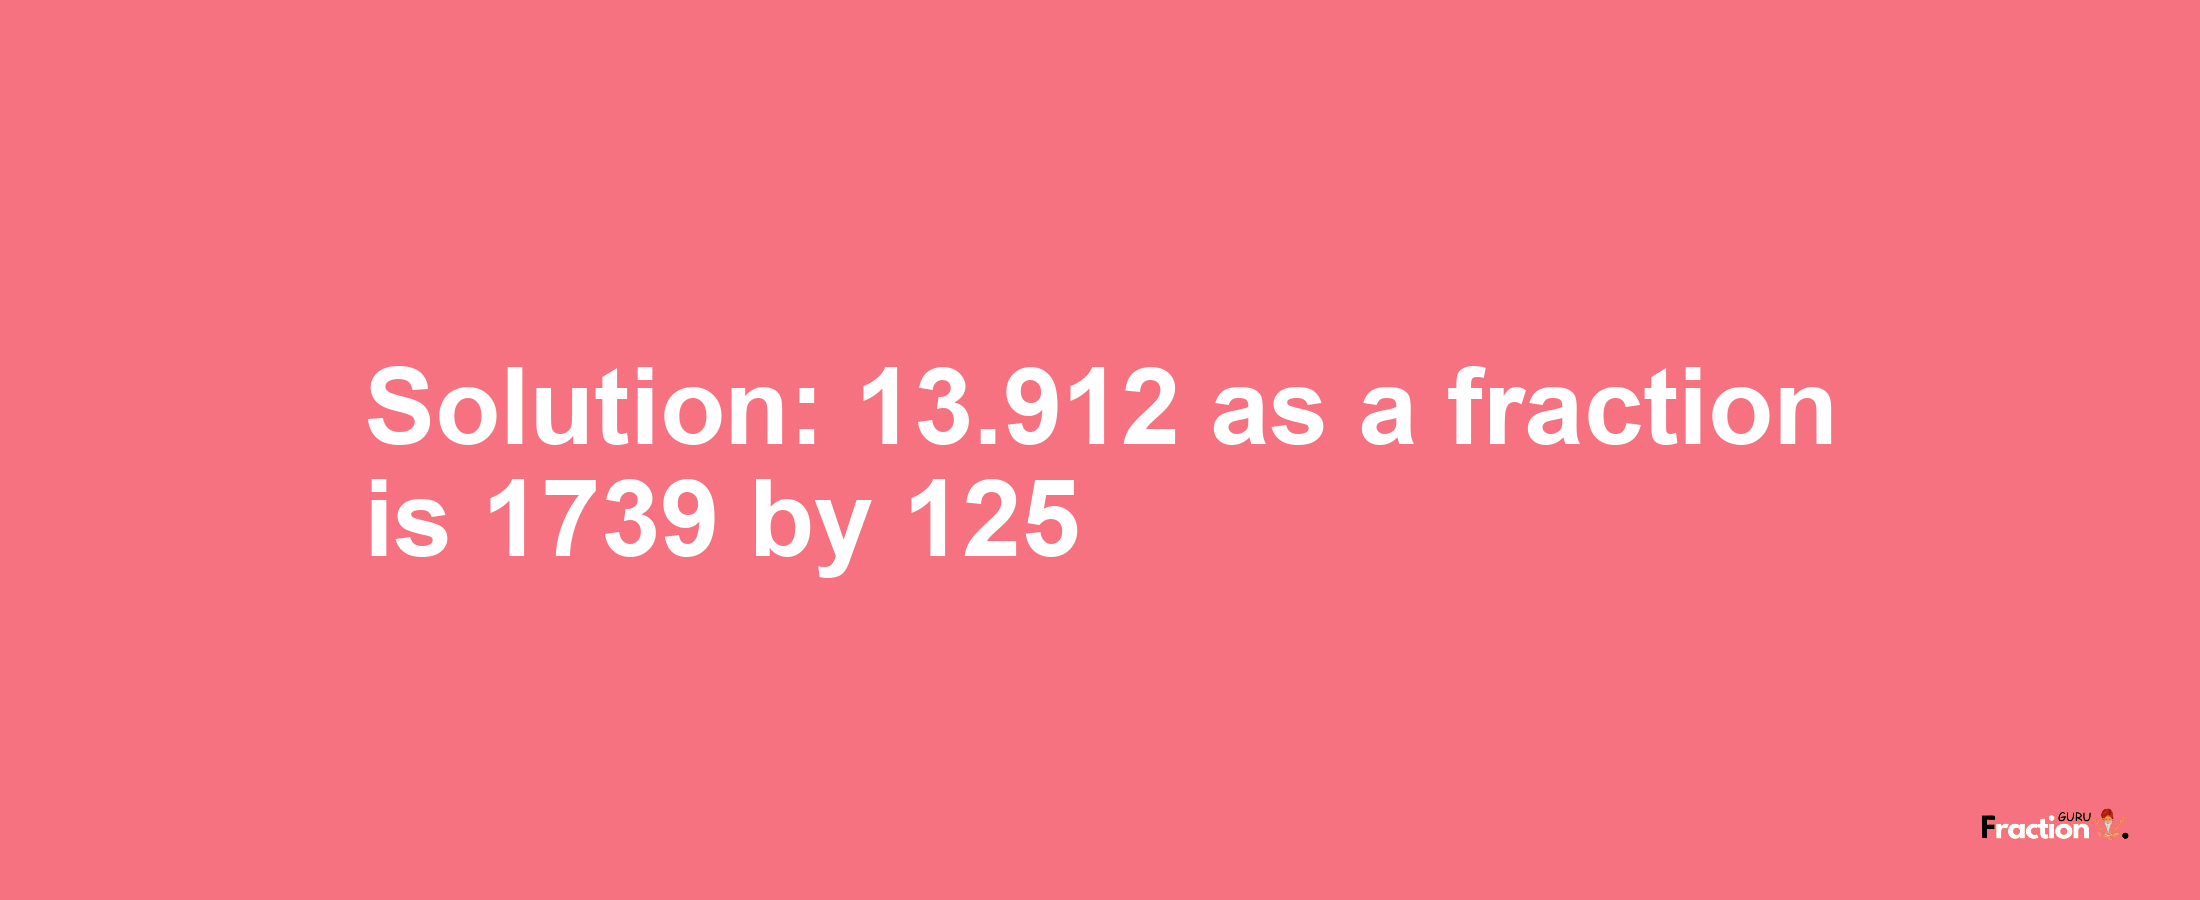 Solution:13.912 as a fraction is 1739/125